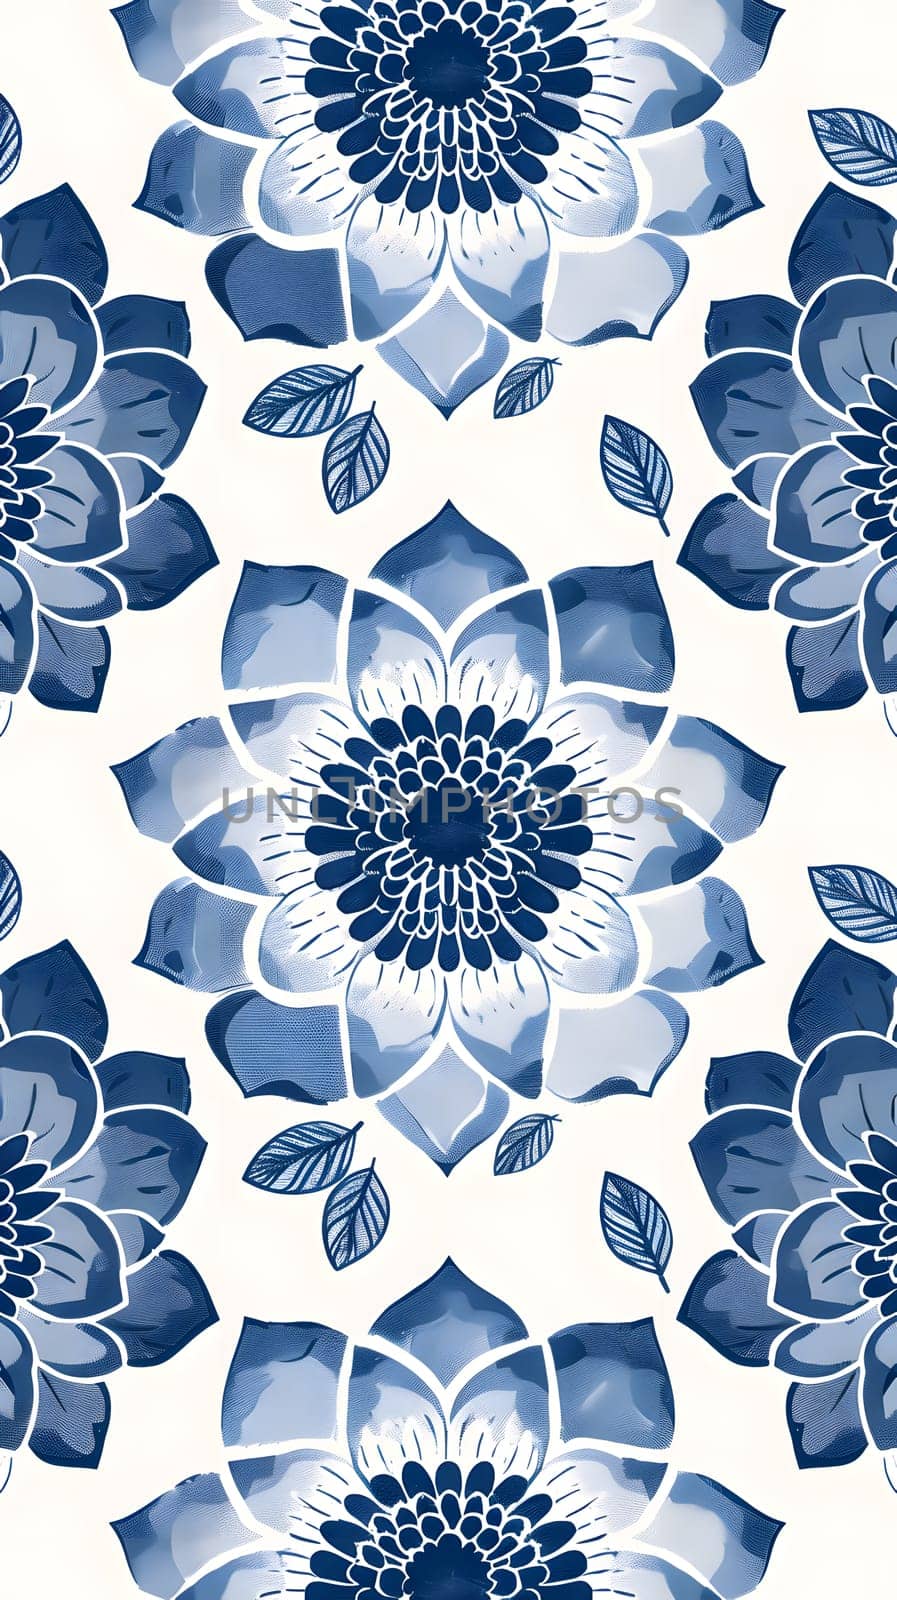 A seamless pattern of azure flowers and leaves on a white background, creating a symmetrical and artistic design. The electric blue accents add a pop of color to the aquaticthemed organism artwork